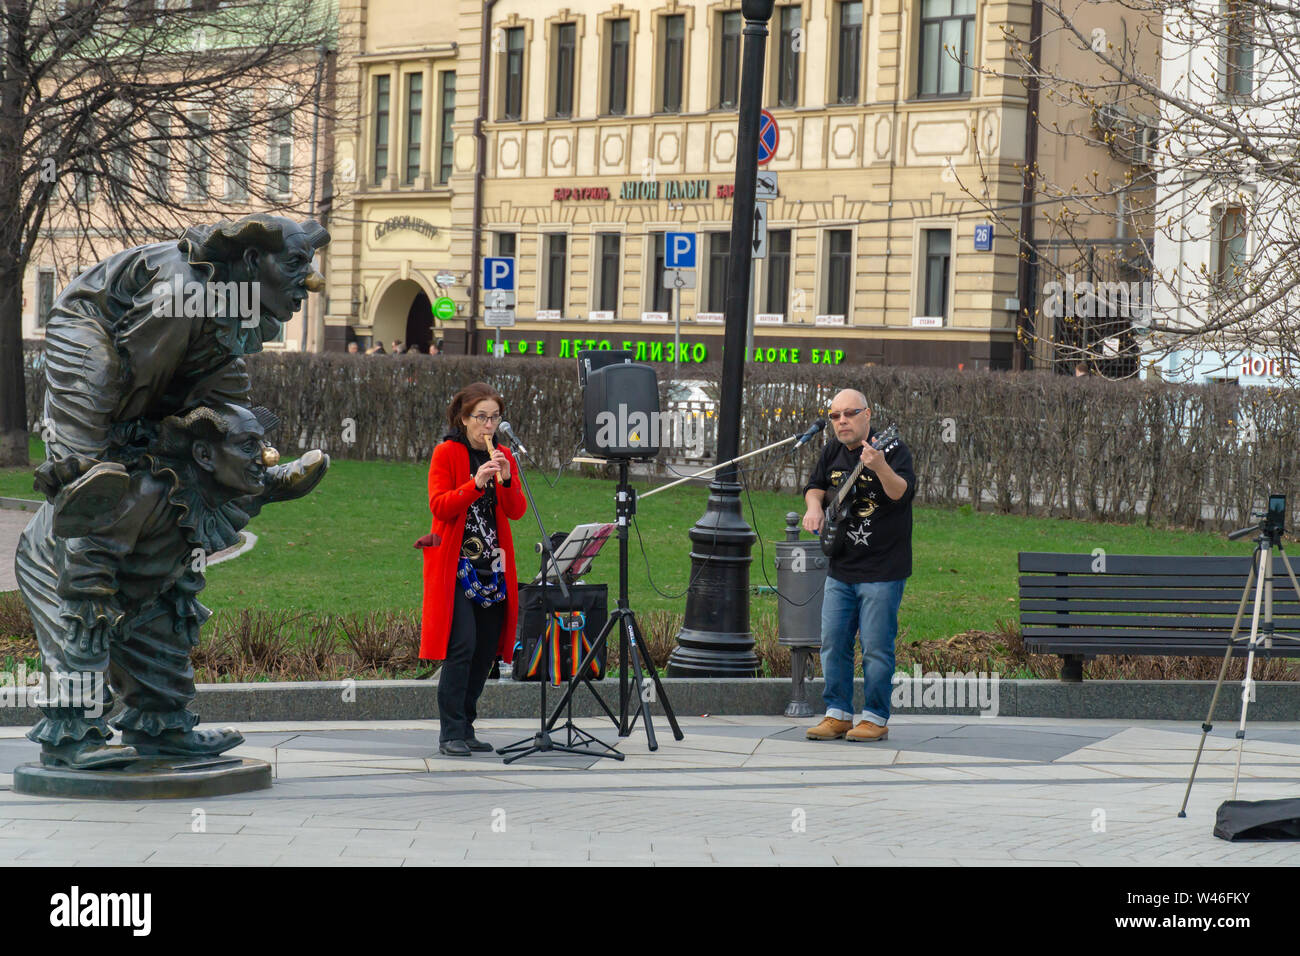 Moscow, Russia - April 29, 2019: Musical street perforners and a bronze statue of clown at Clowns Square on Tsvetnoy Boulevard in Moscow Stock Photo